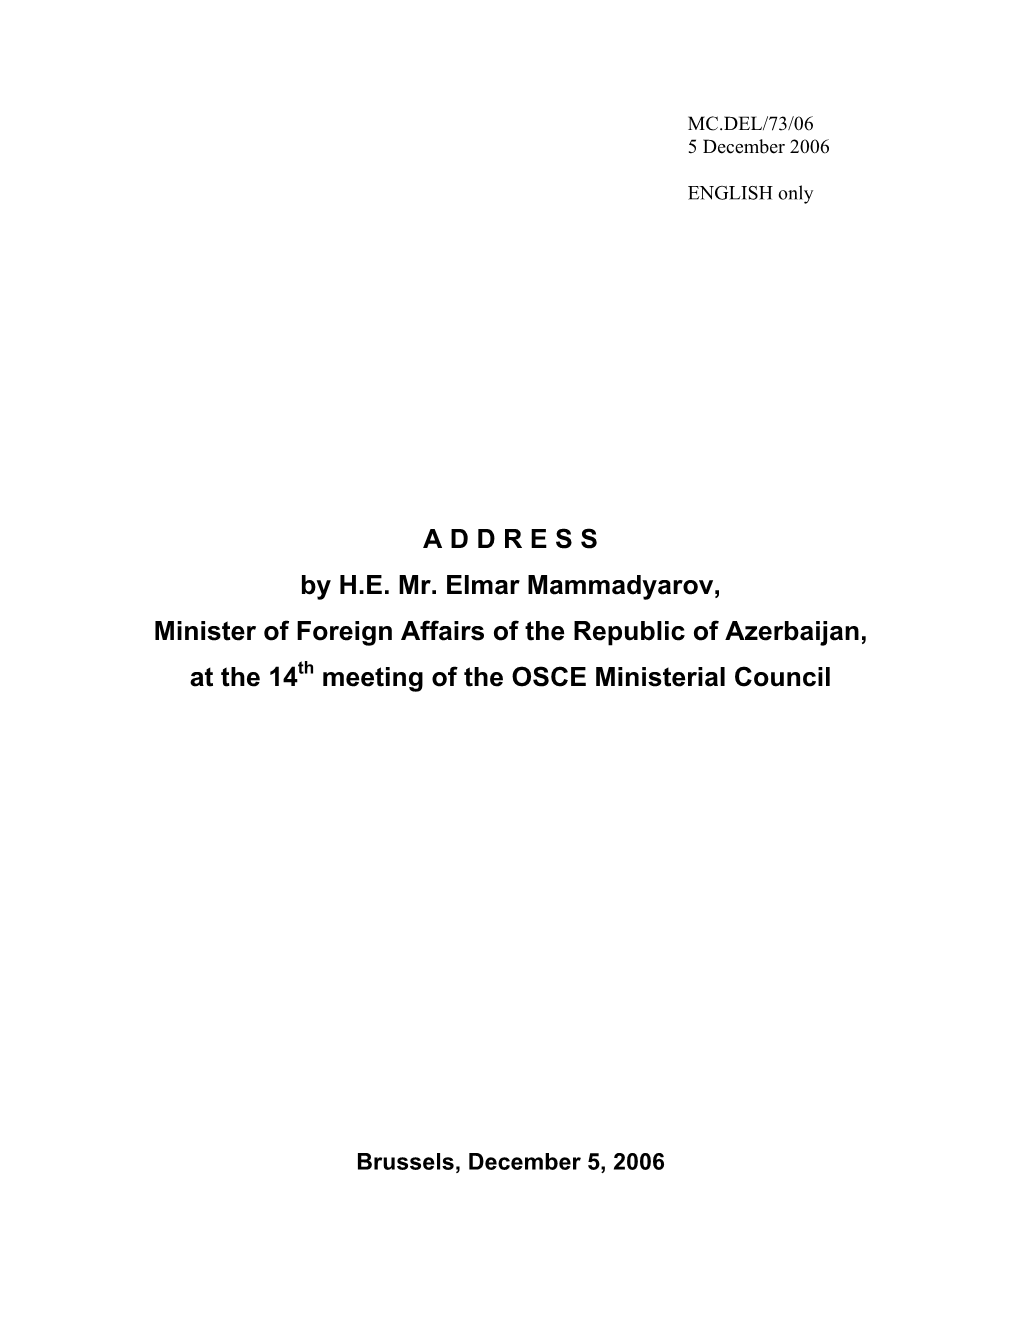 A D D R E S S by H.E. Mr. Elmar Mammadyarov, Minister of Foreign Affairs of the Republic of Azerbaijan, at the 14 Meeting Of